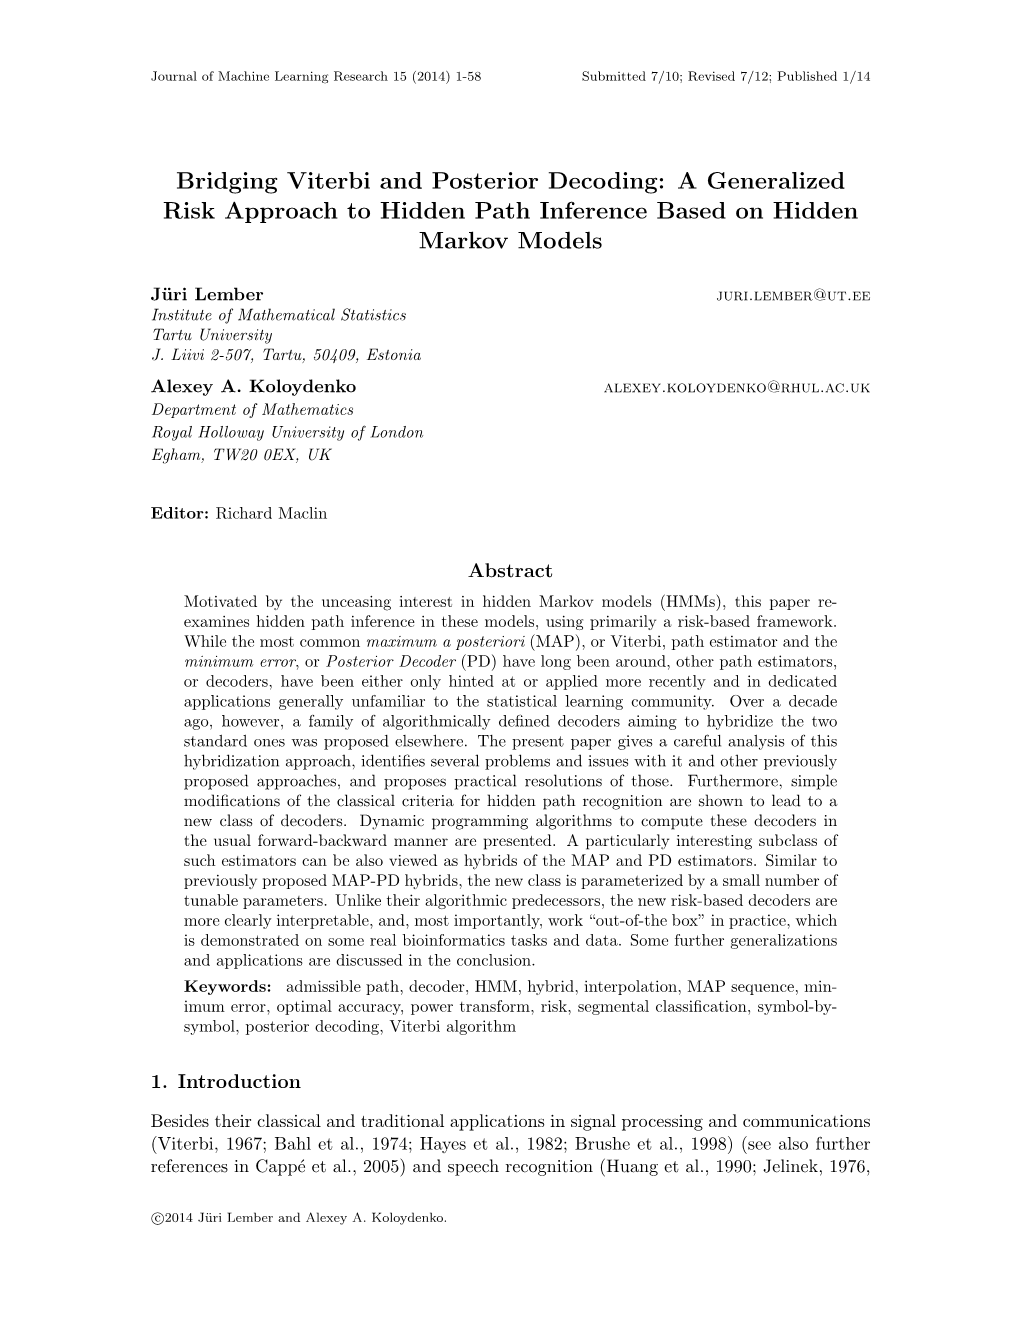 Bridging Viterbi and Posterior Decoding: a Generalized Risk Approach to Hidden Path Inference Based on Hidden Markov Models